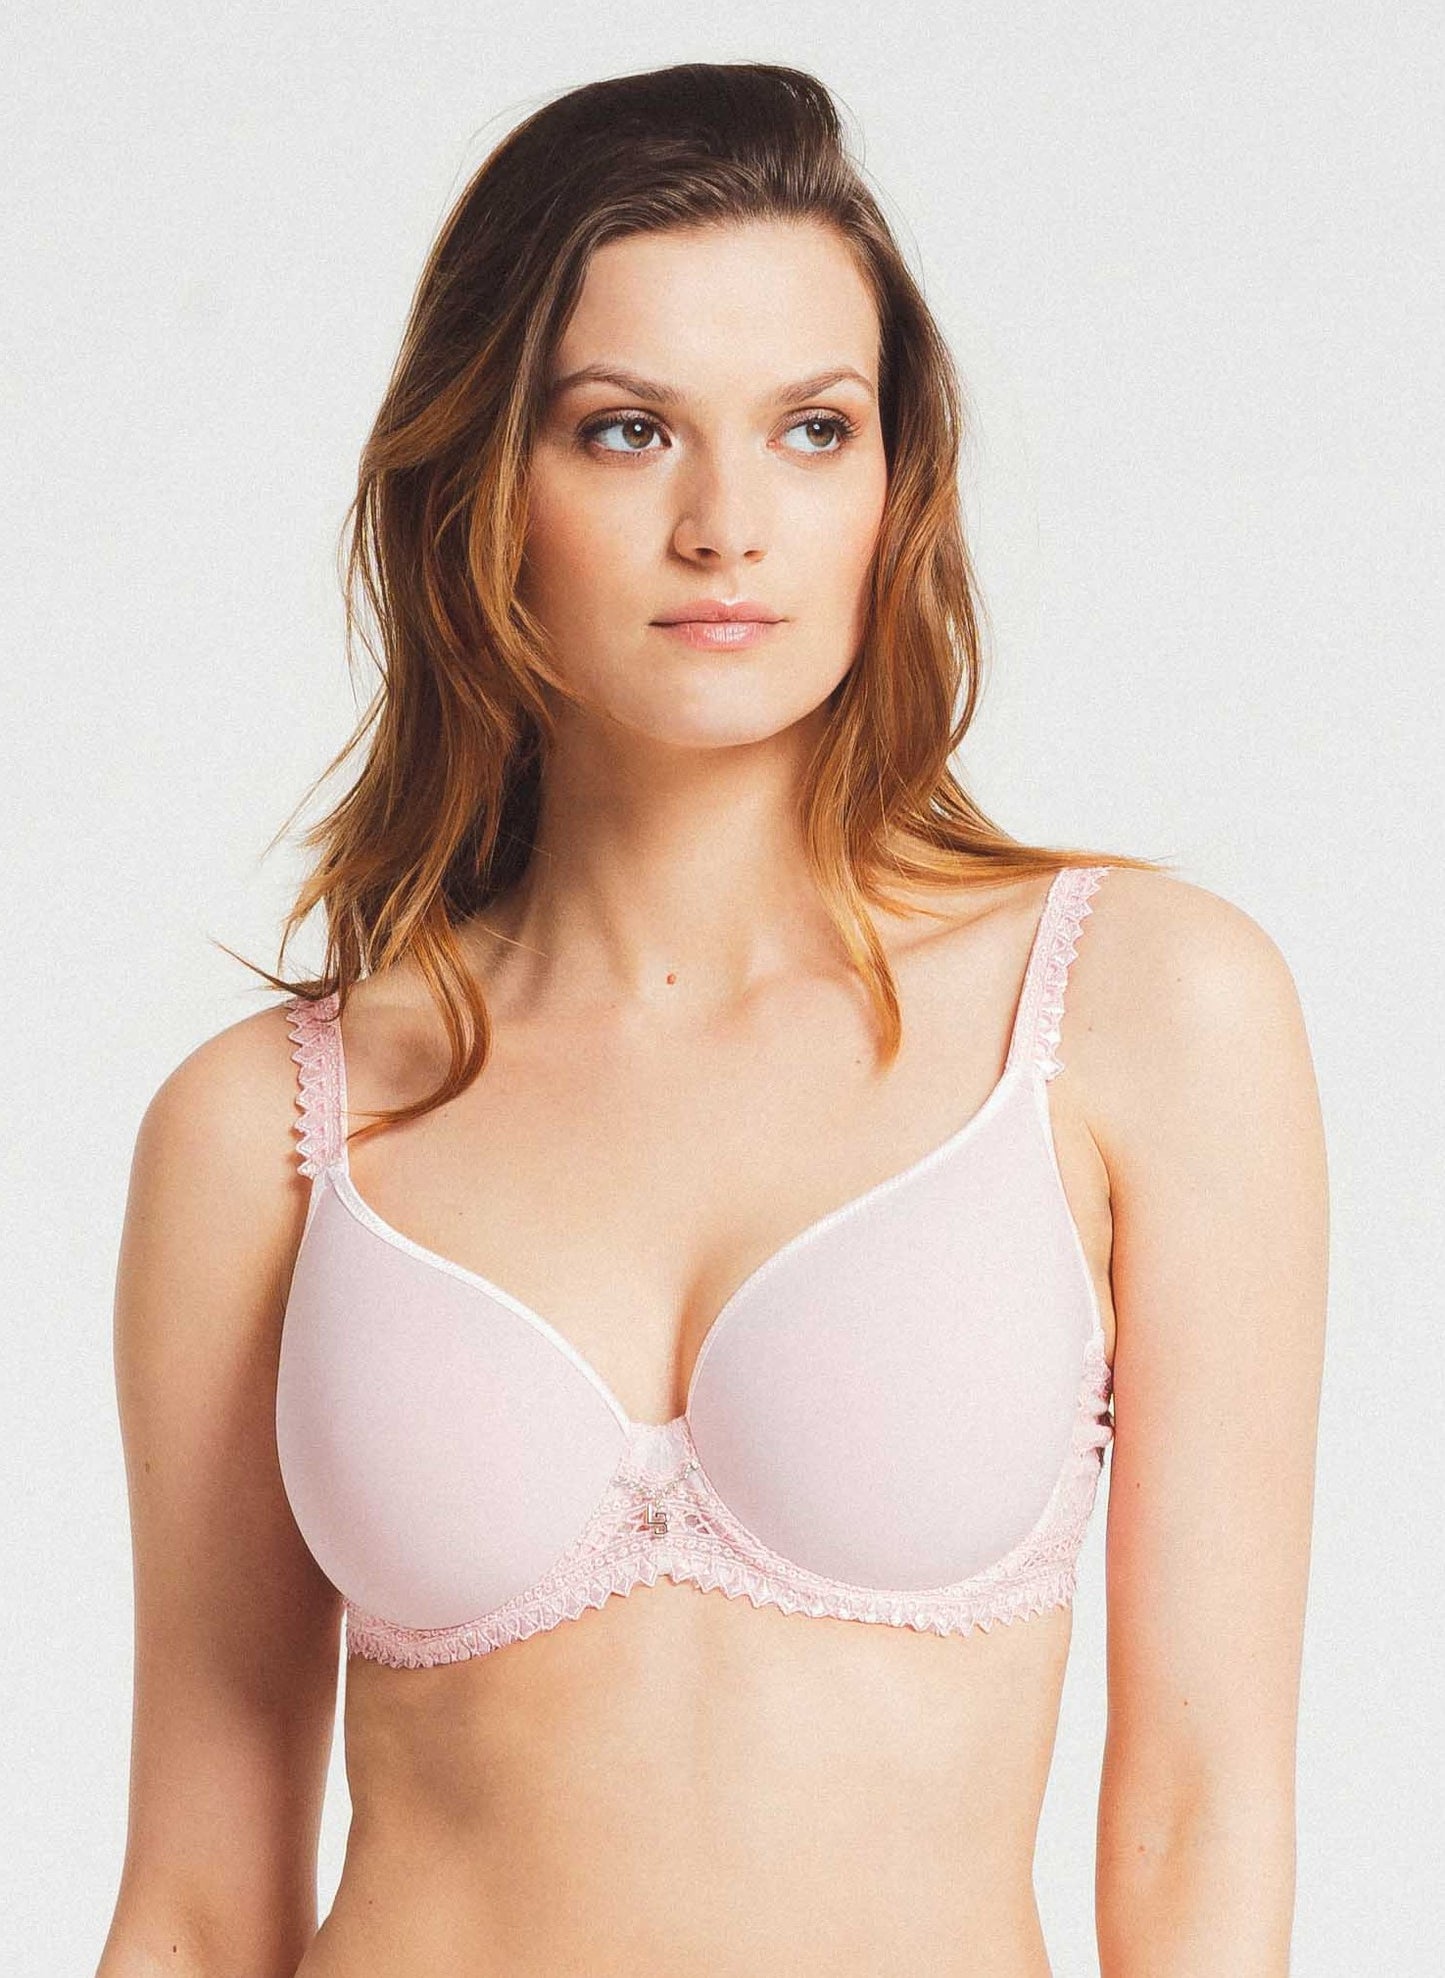 Ice blue spacer bra from the Paco line by Louisa Bracq Paris at Di Moda Lingerie Toronto.